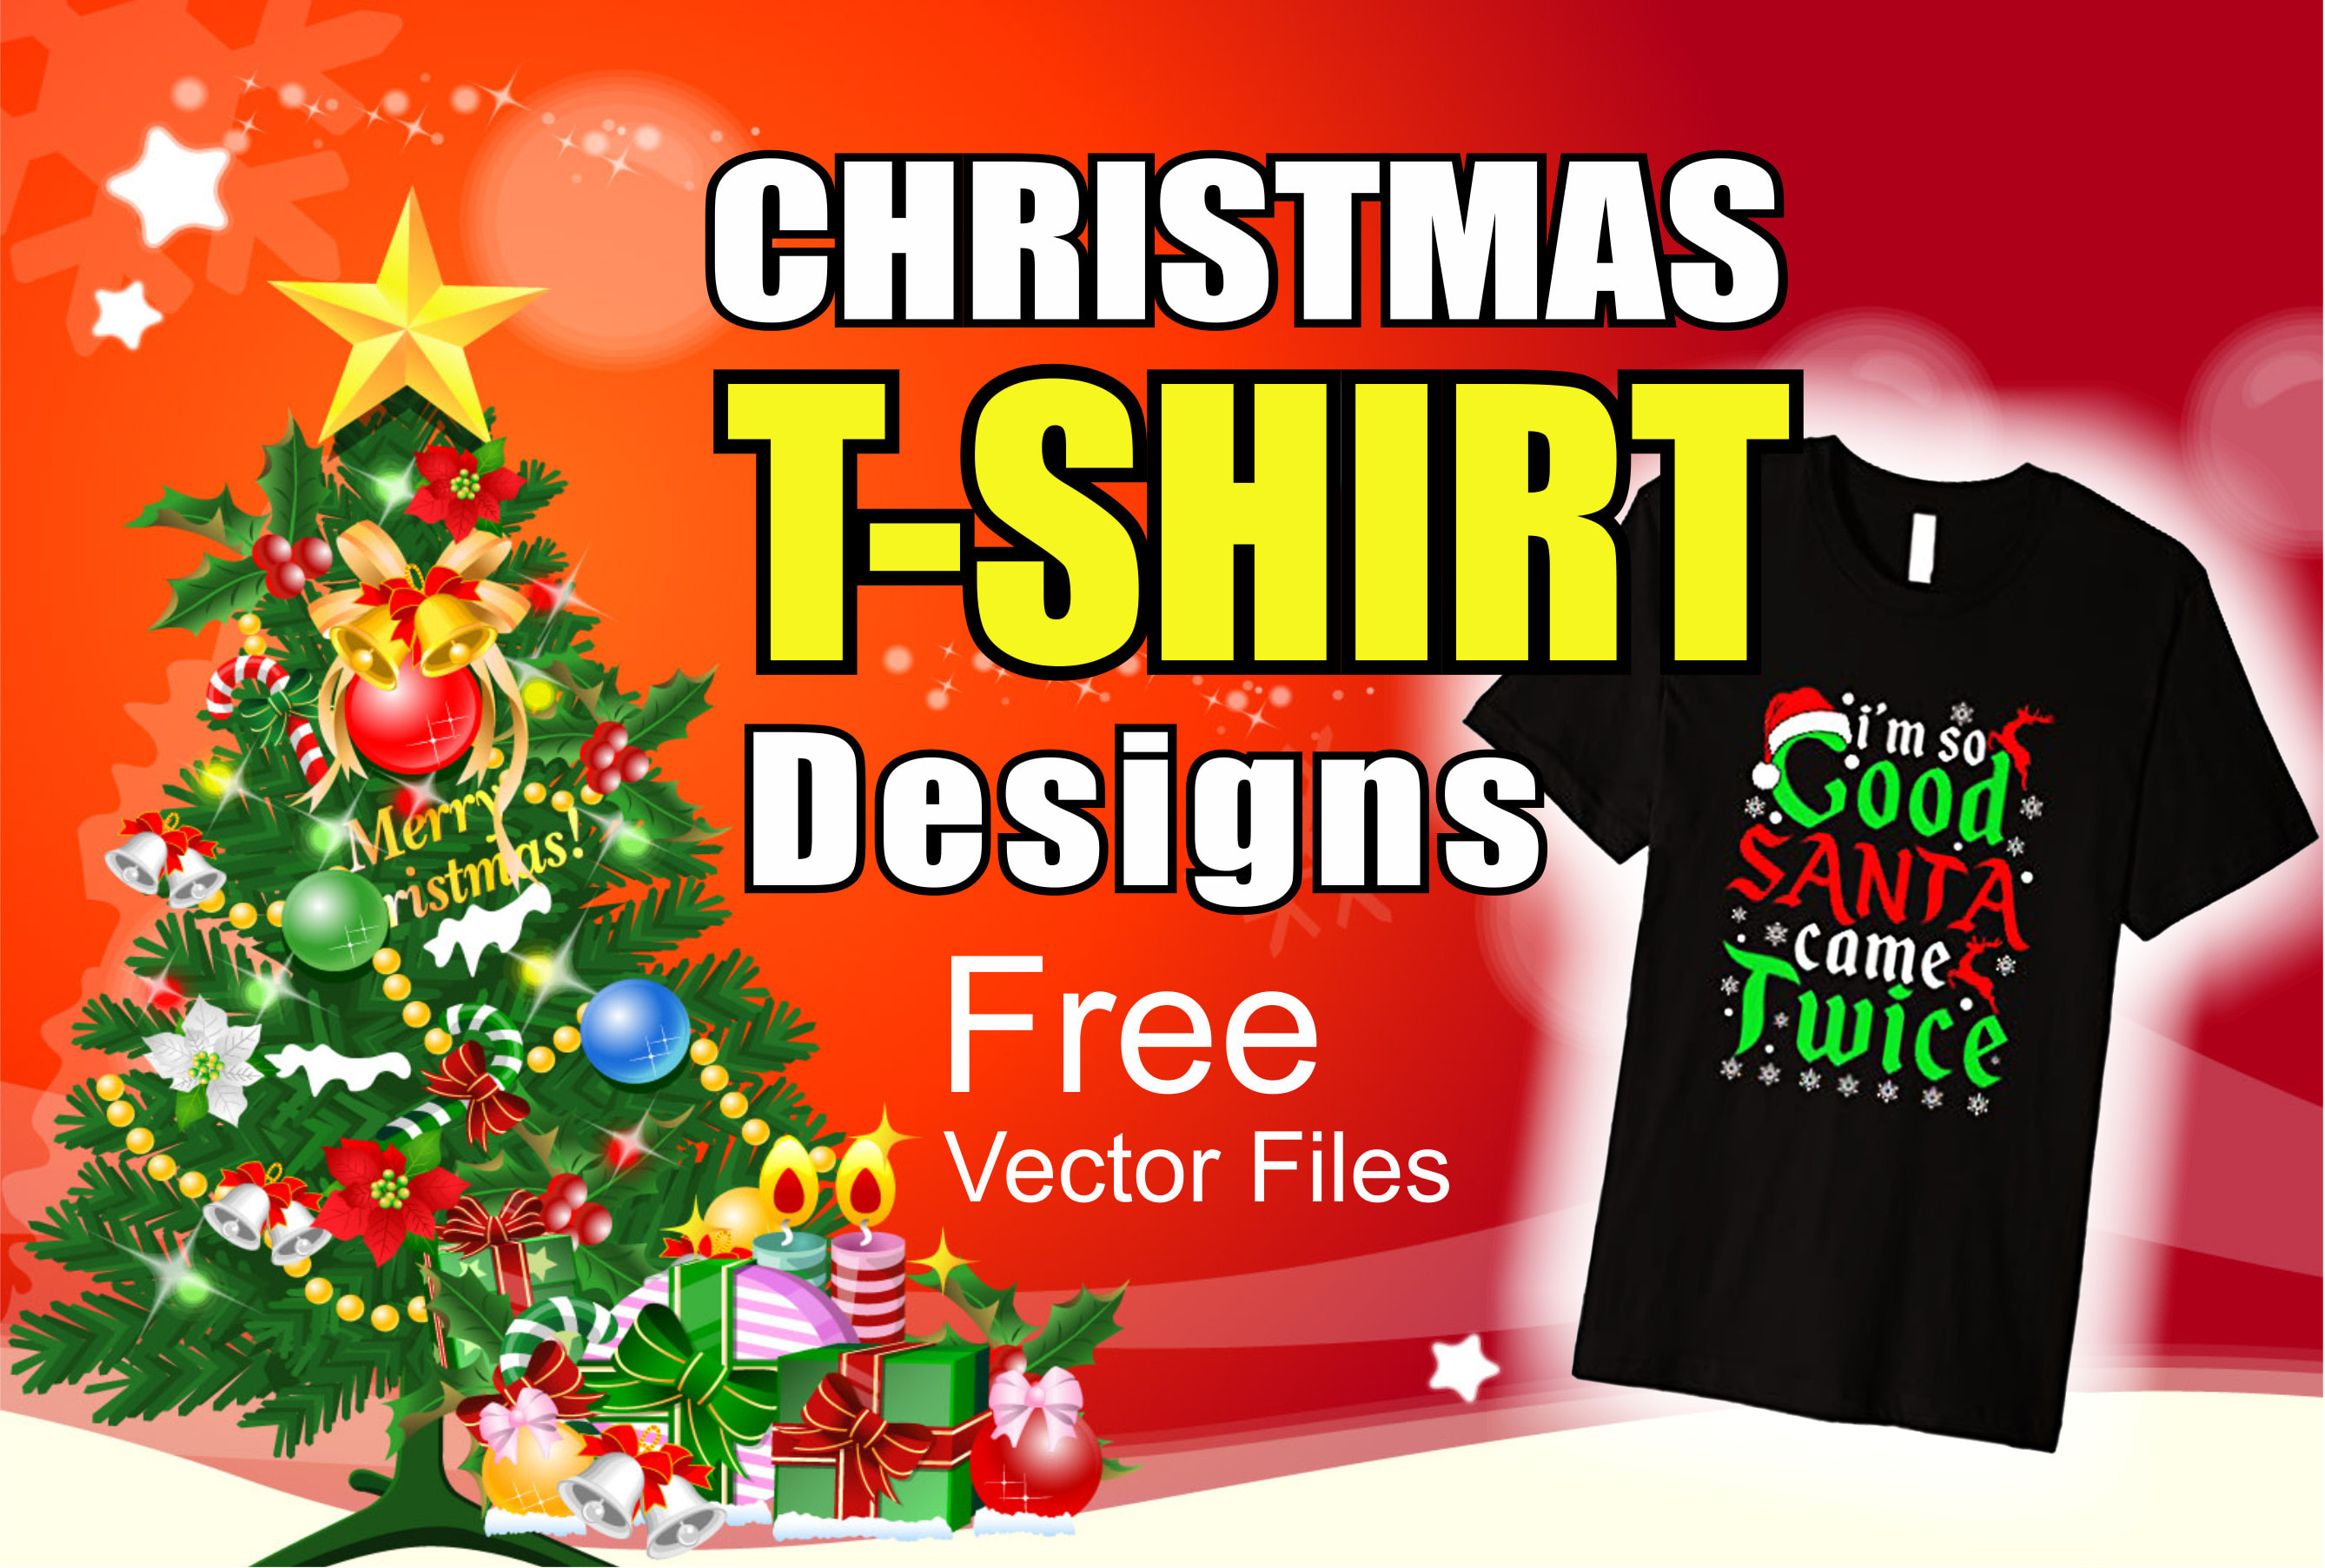 Download Create Christmas Tshirt Design For Print And Vinyl Cut By Tshirt Design Fiverr